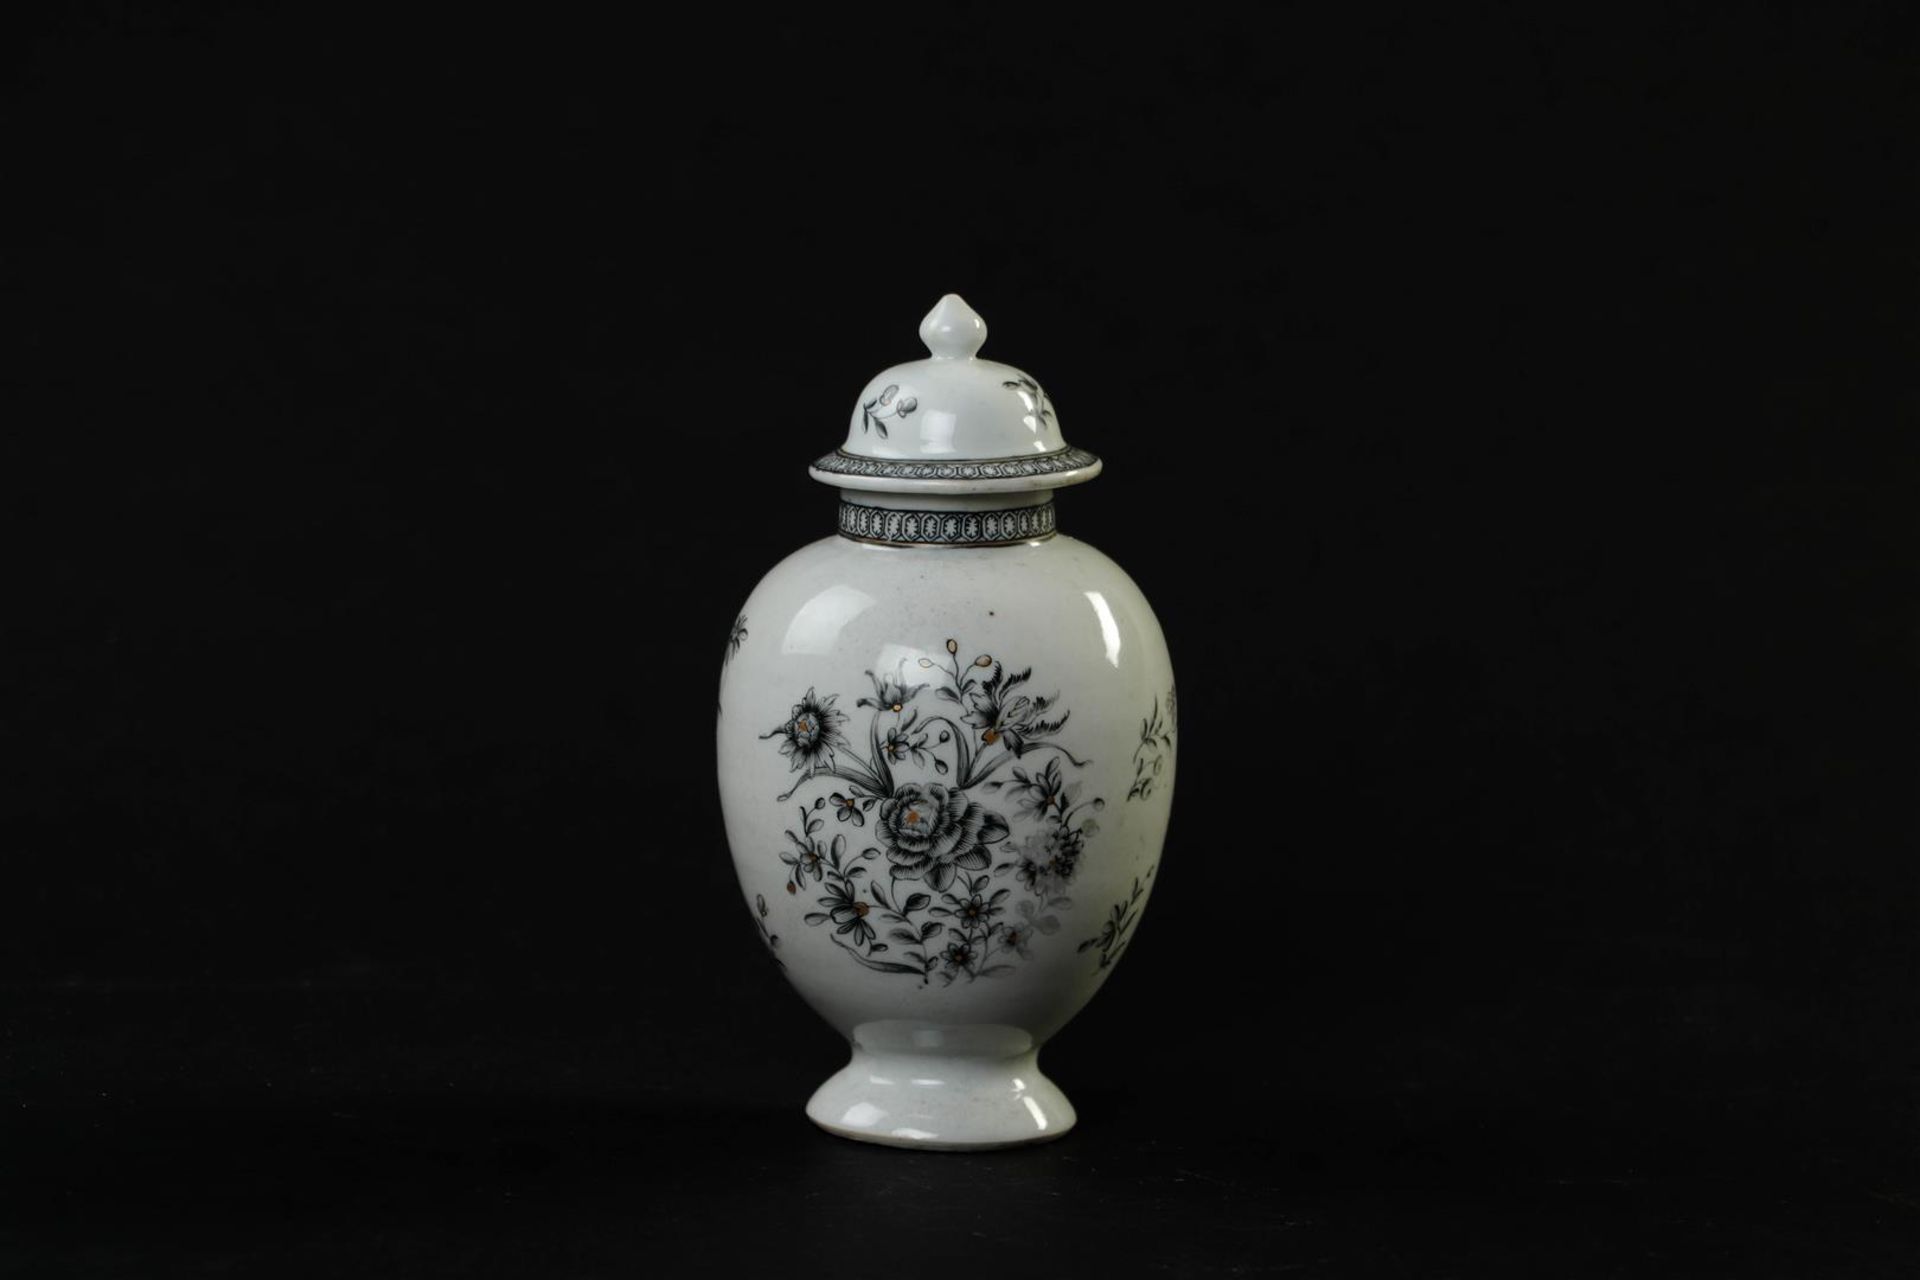 An Encre de Chine tableware set consisting of a teapot, milk jug, tea caddy, patty pan and spoon tra - Image 17 of 24